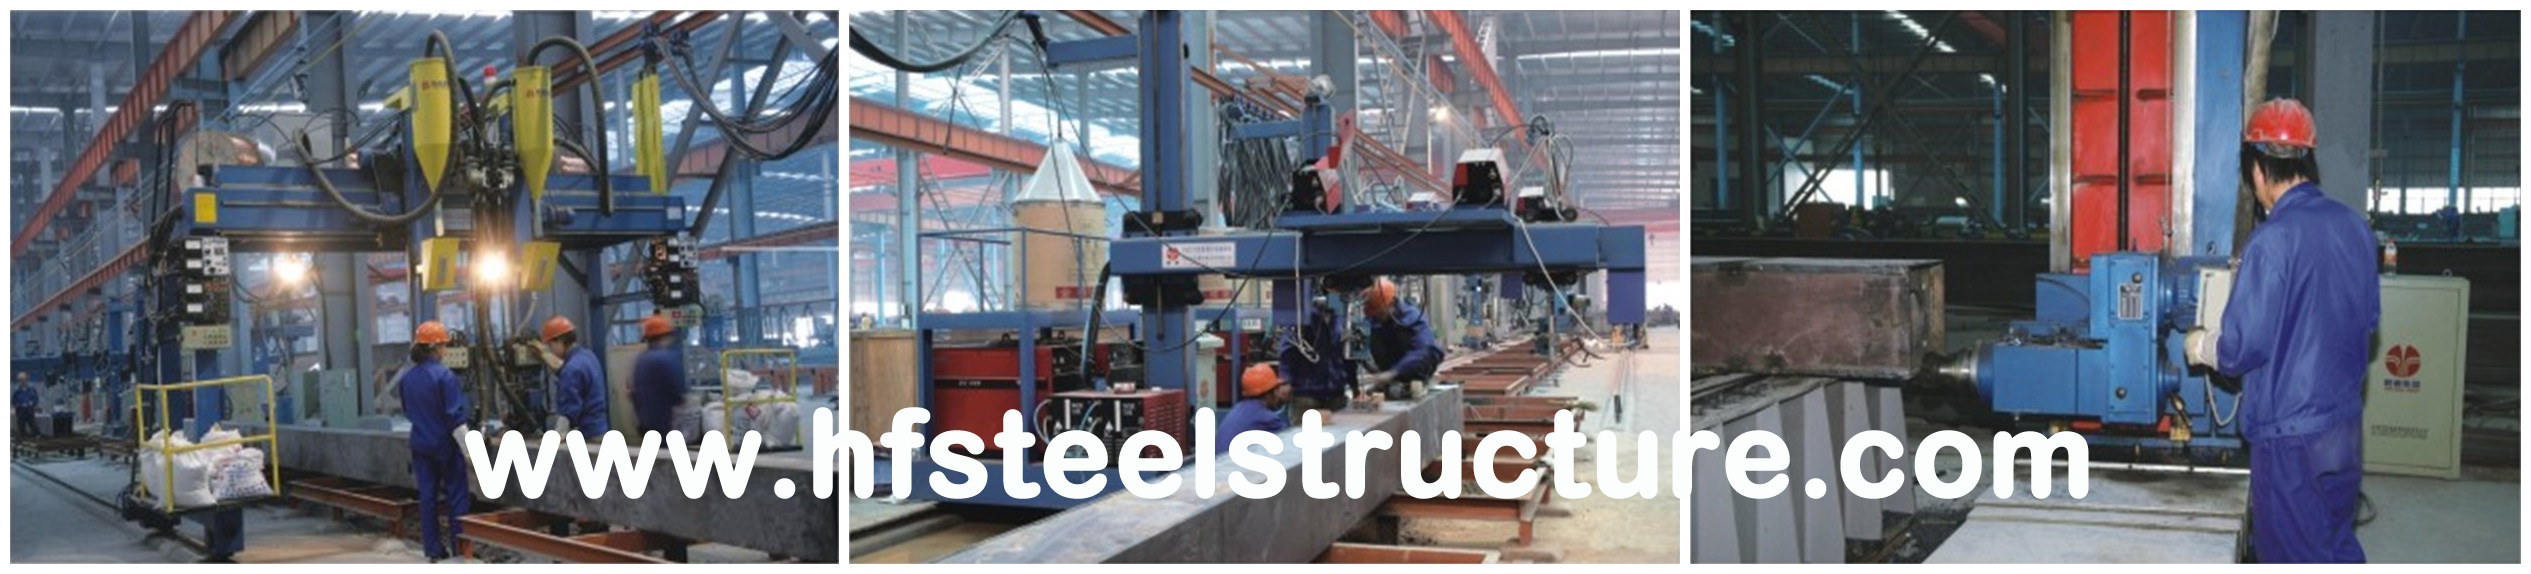 Custom Hot Dip Galvanized, Waterproof And Stainless Steel Structural Steel Fabrications